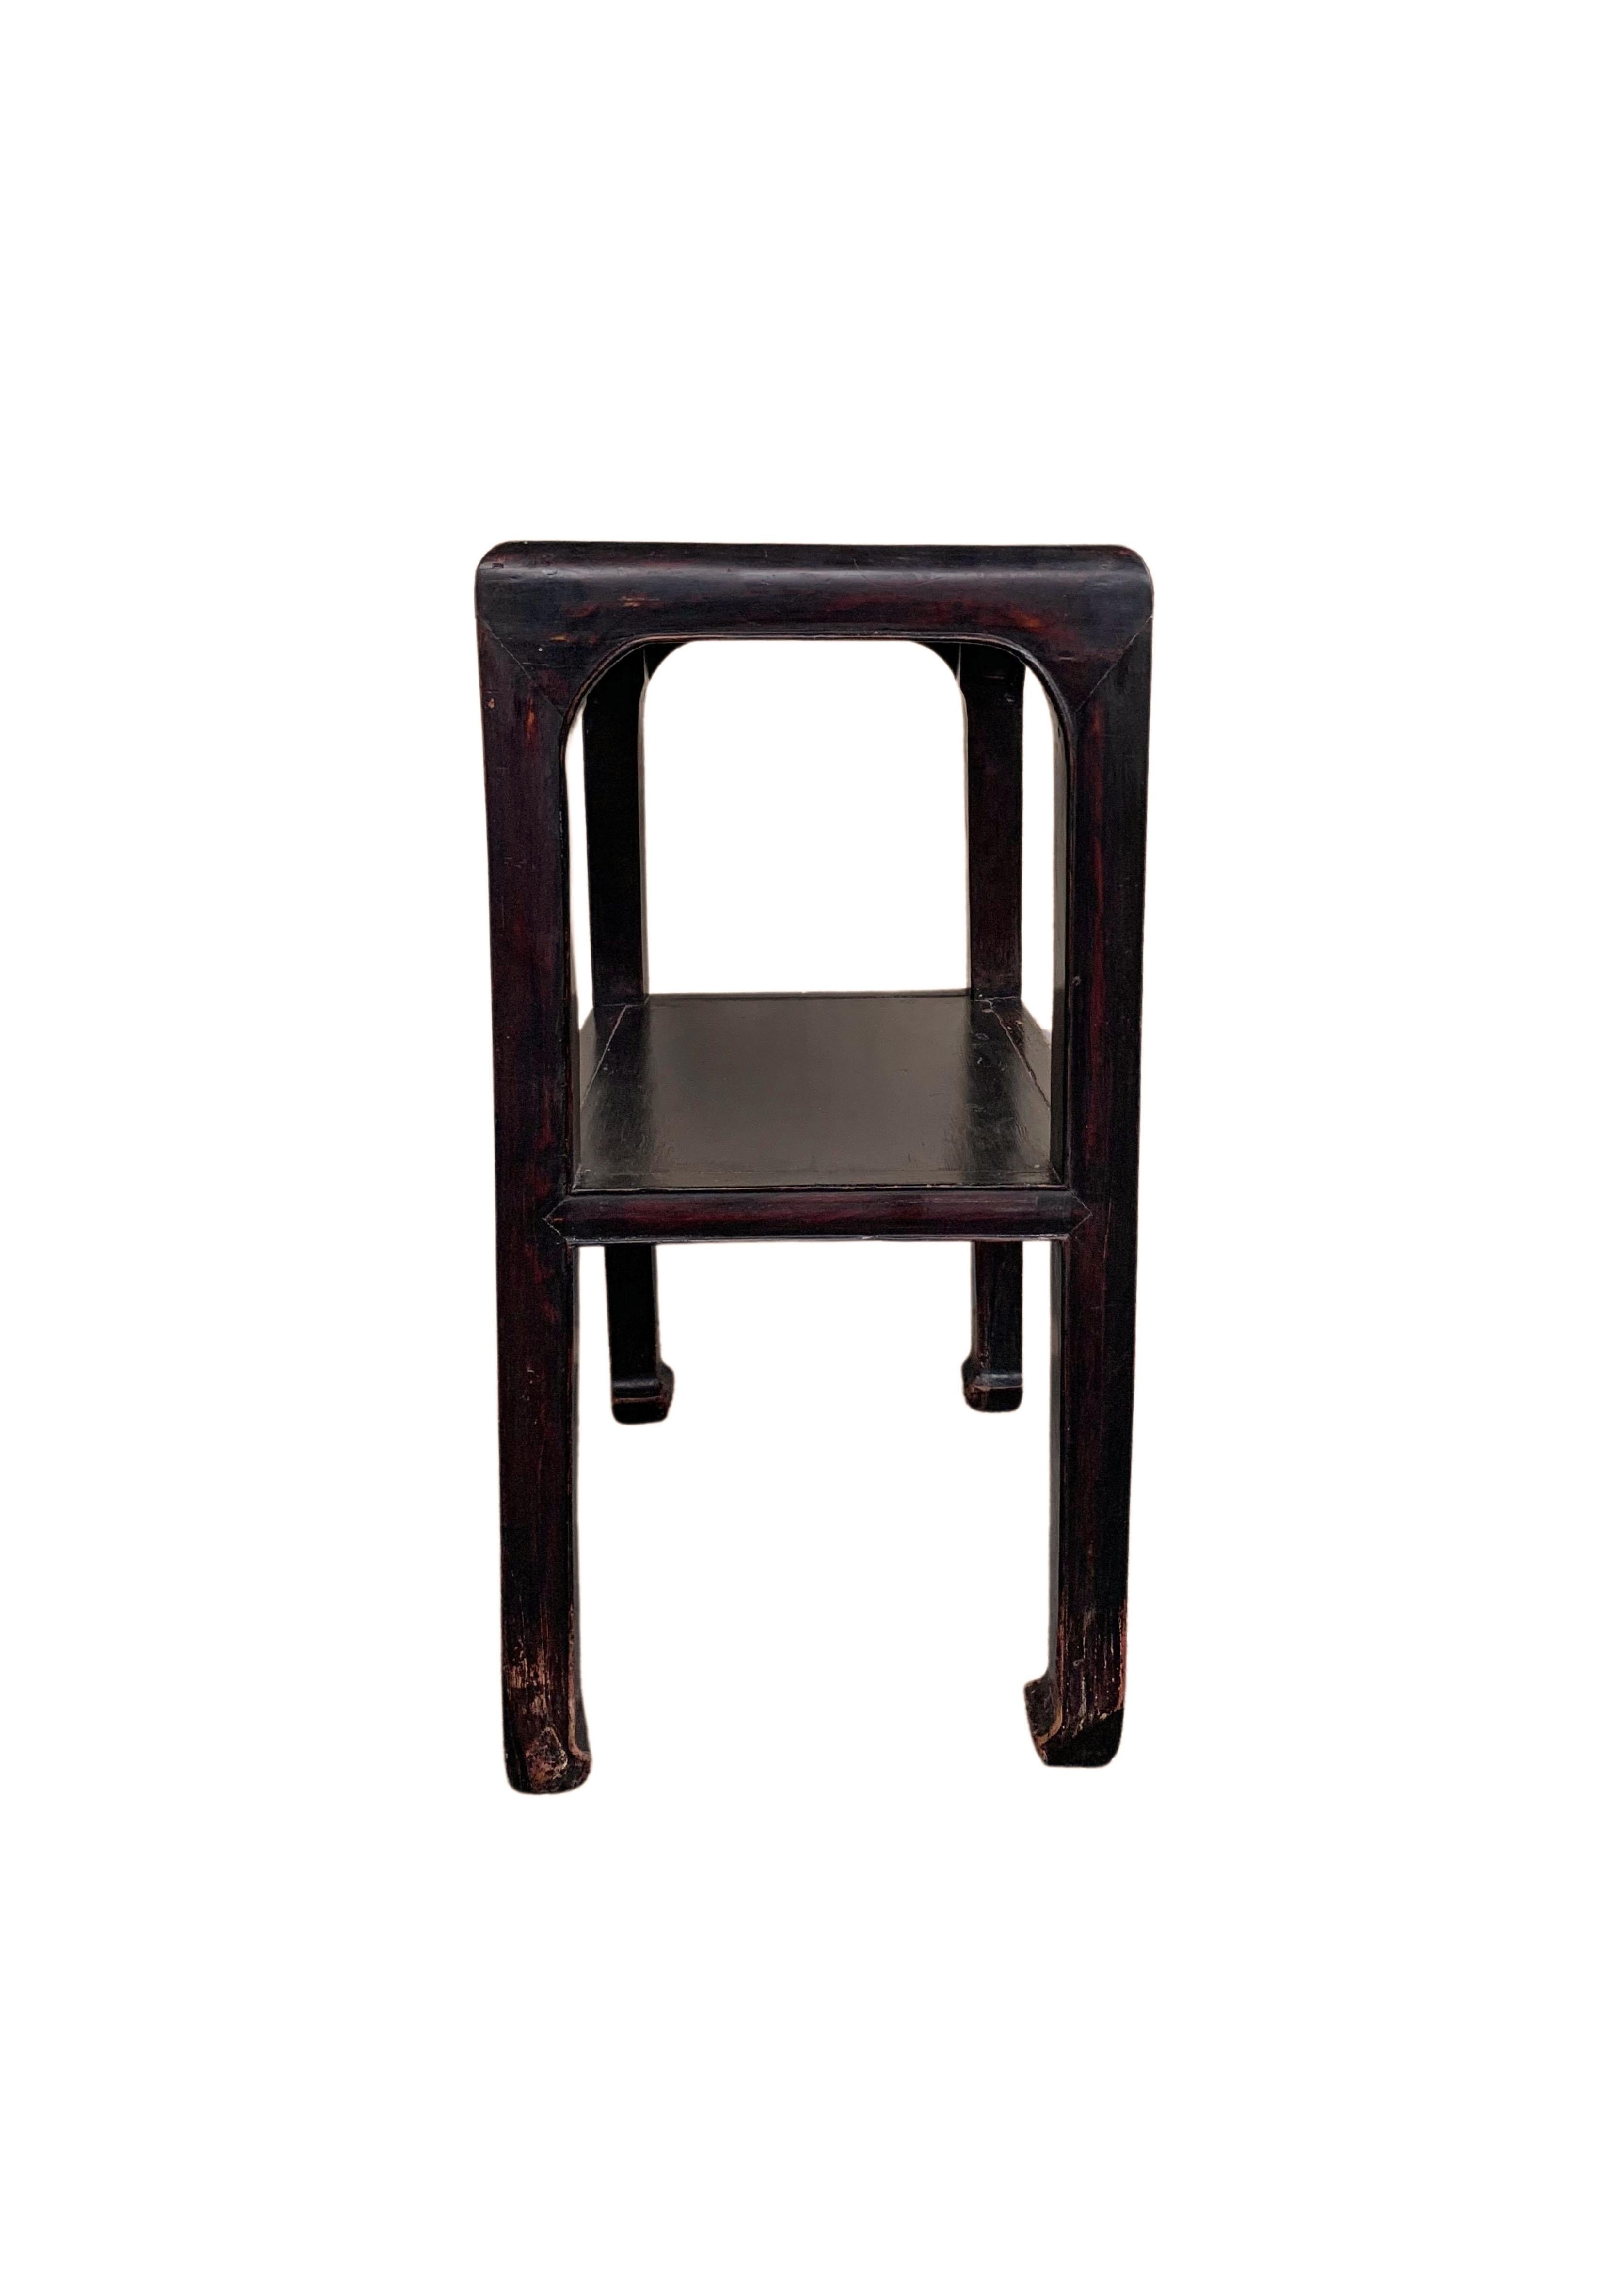 Hand-Crafted Chinese Lacquered Wooden Table with Curved Legs, c. 1950 For Sale